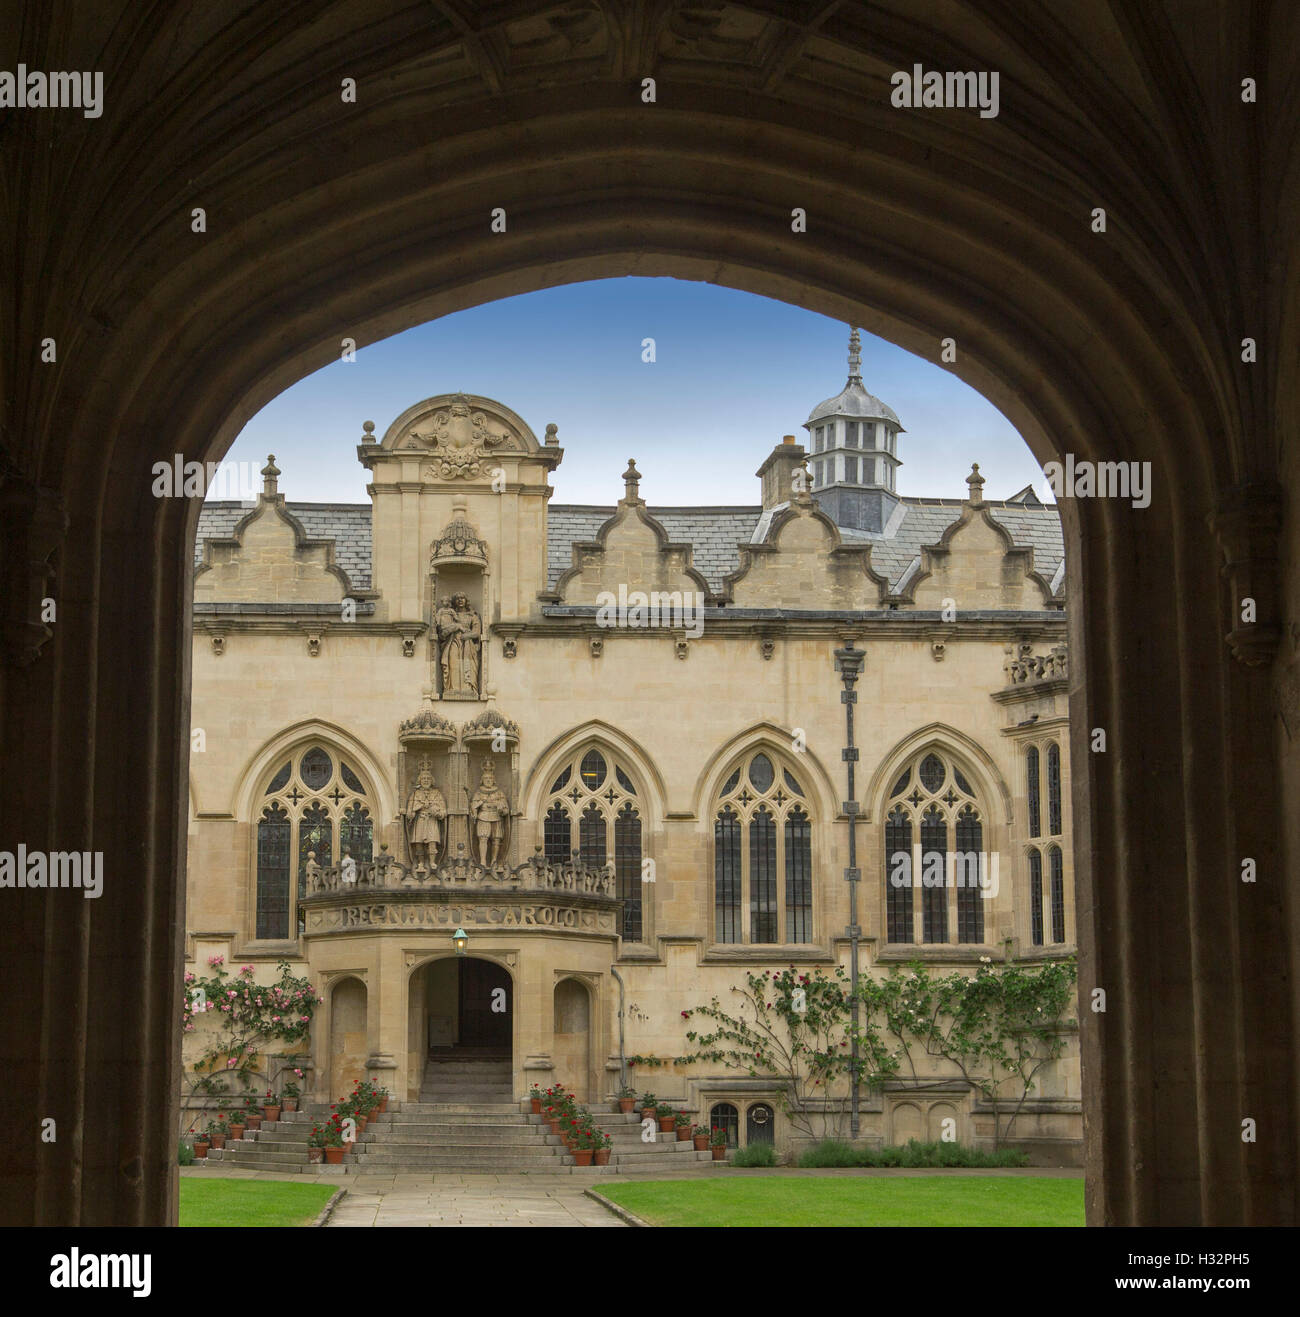 Ornate entrance to Oriel college in Oxford, with  view through dark archway to 17th century gothic style building under blue sky Stock Photo